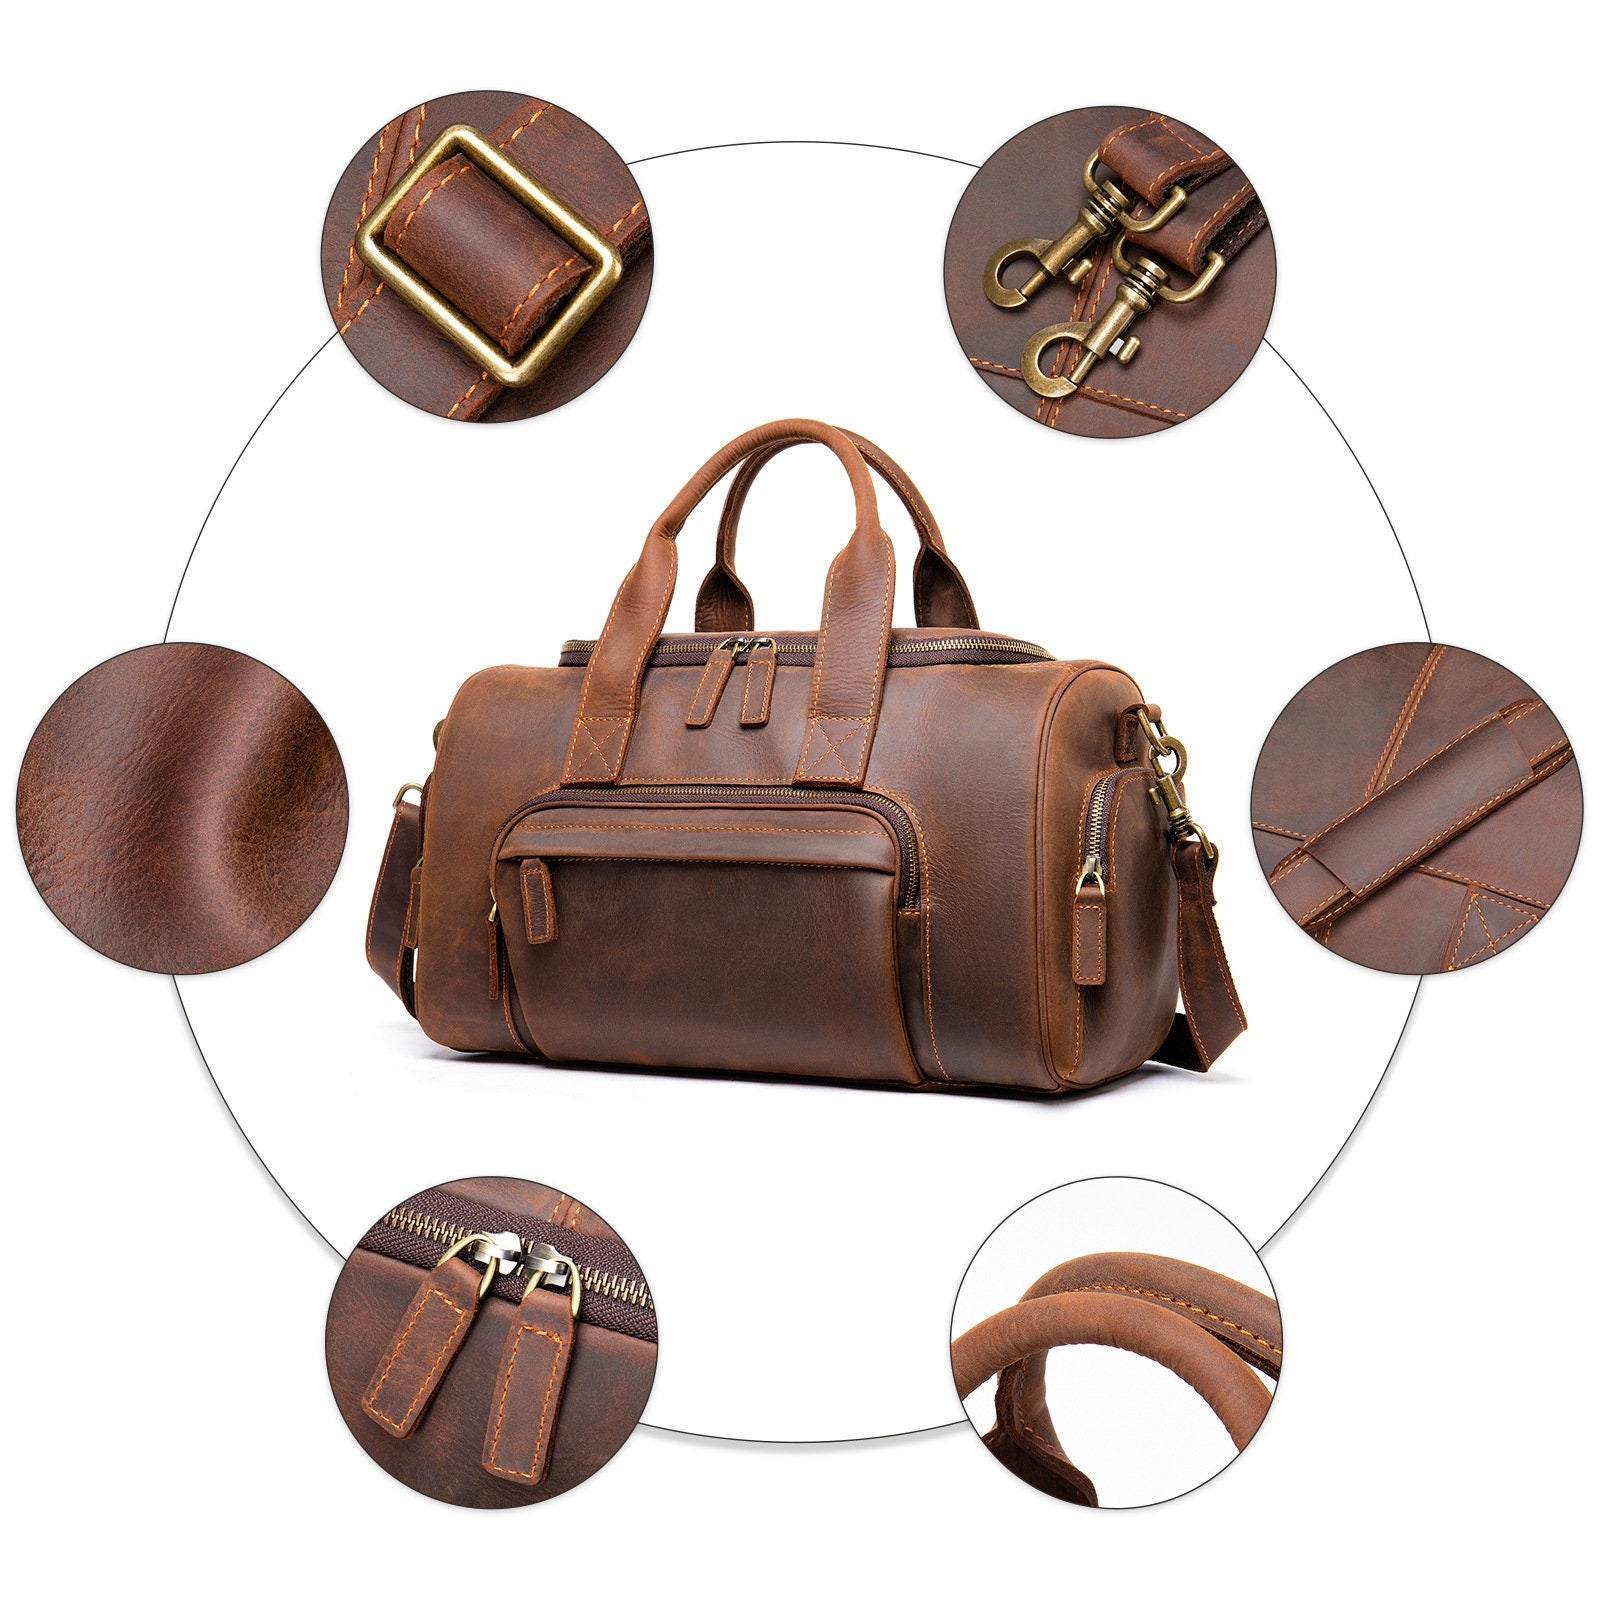 New Leather Handmade Retro Leather Men's Hand Luggage Bag Large Capacity Leather bag, leather tote bag, leather carryon bag, shoulder bag